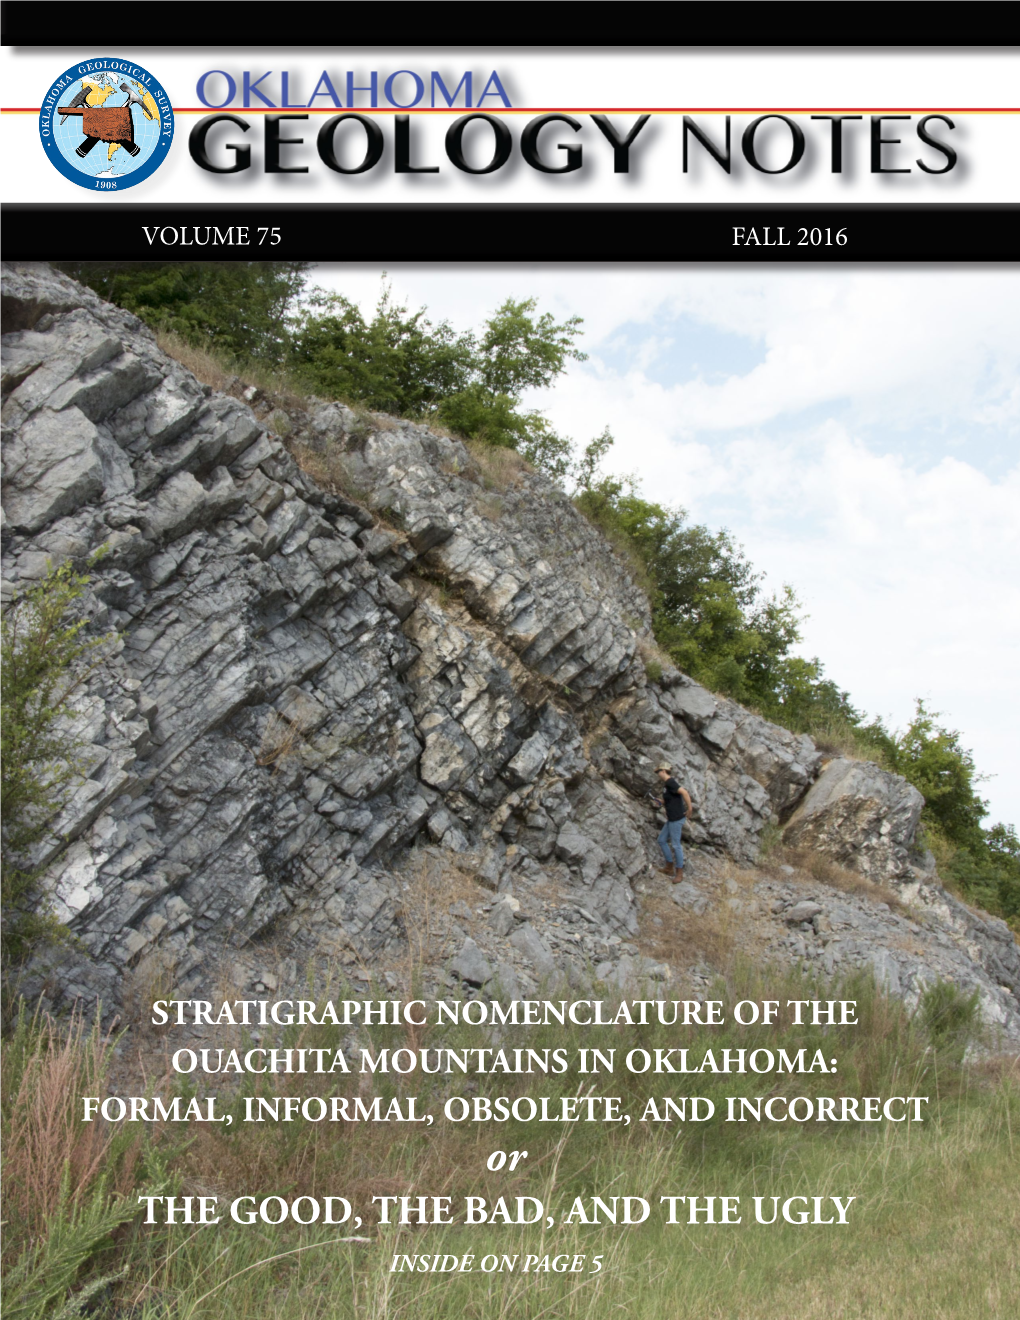 The Oklahoma Geology Notes, Which Had Been a Feature of the Oklahoma Geology Scene Since the Early 40S, but Was Last Published in 2014